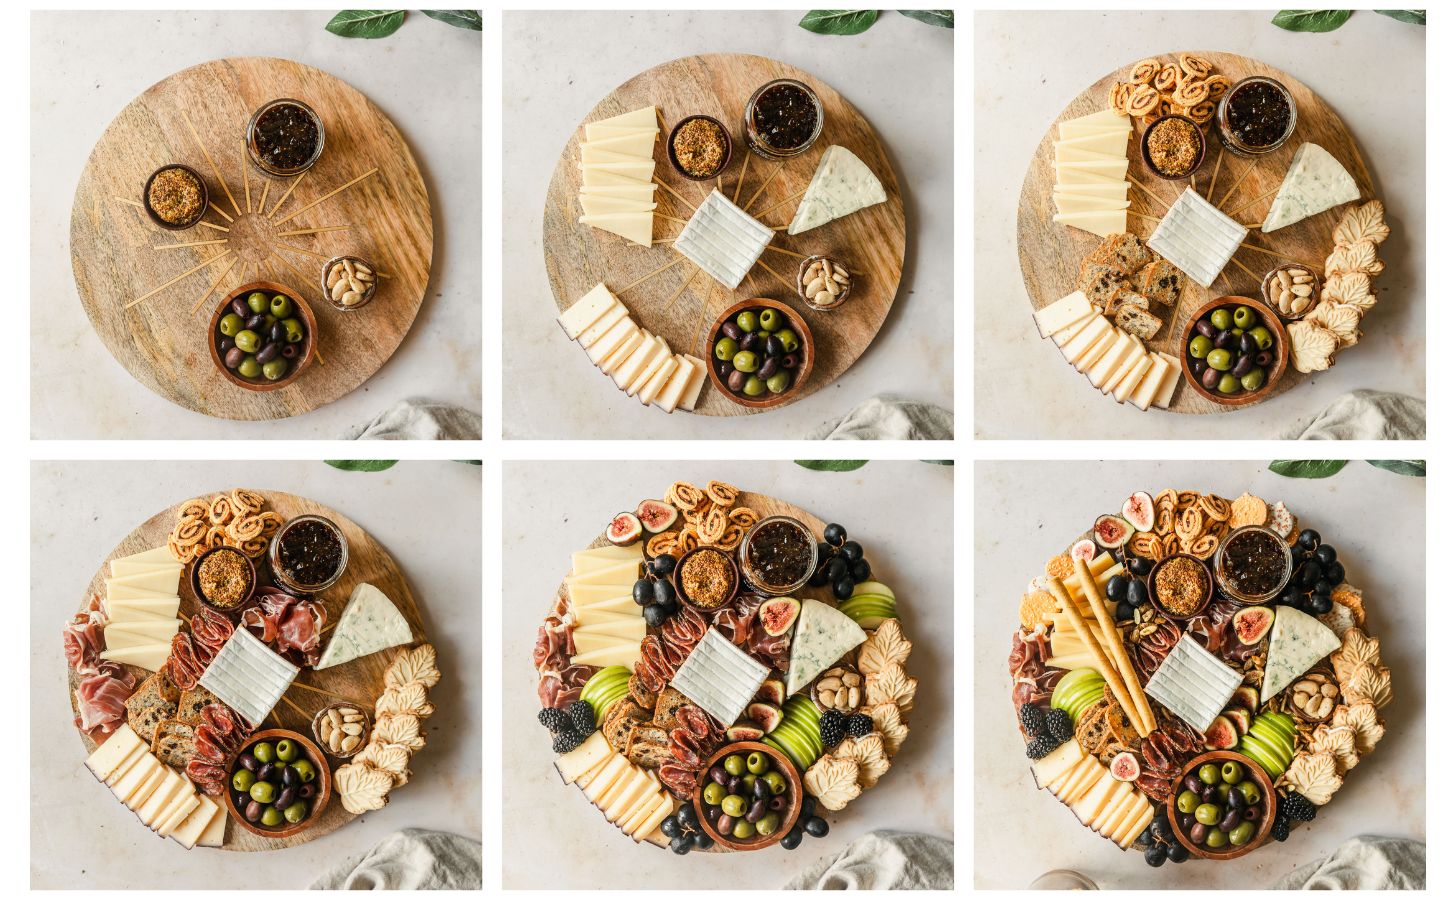 Six steps to making a grazing platter. In photo 1, a wood board is topped with wood bowls of olives, mustard, almonds, and jam on a beige counter next to greenery. In photo 2, the board has 4 cheeses on top. In photo 3, the board has crackers and cookies. In photo 4, the board has meats. In photo 5, the board has nuts and fruit. In photo 6, the board is topped with figs and pepitas.